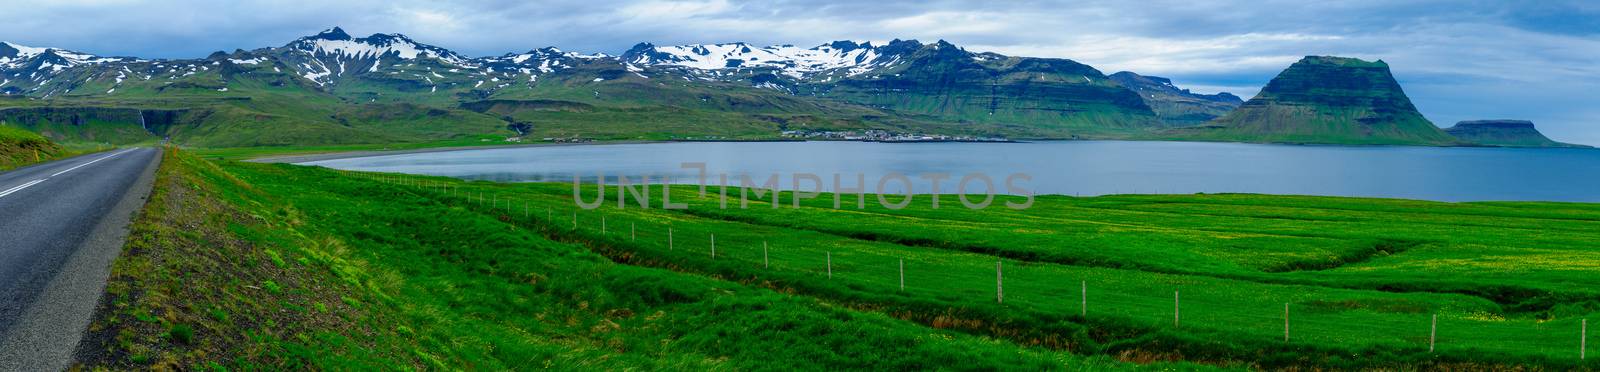 Panoramic landscape, the Kirkjufell mountain (Church mountain), and the town Grundarfjordur, in the Snaefellsnes peninsula, west Iceland